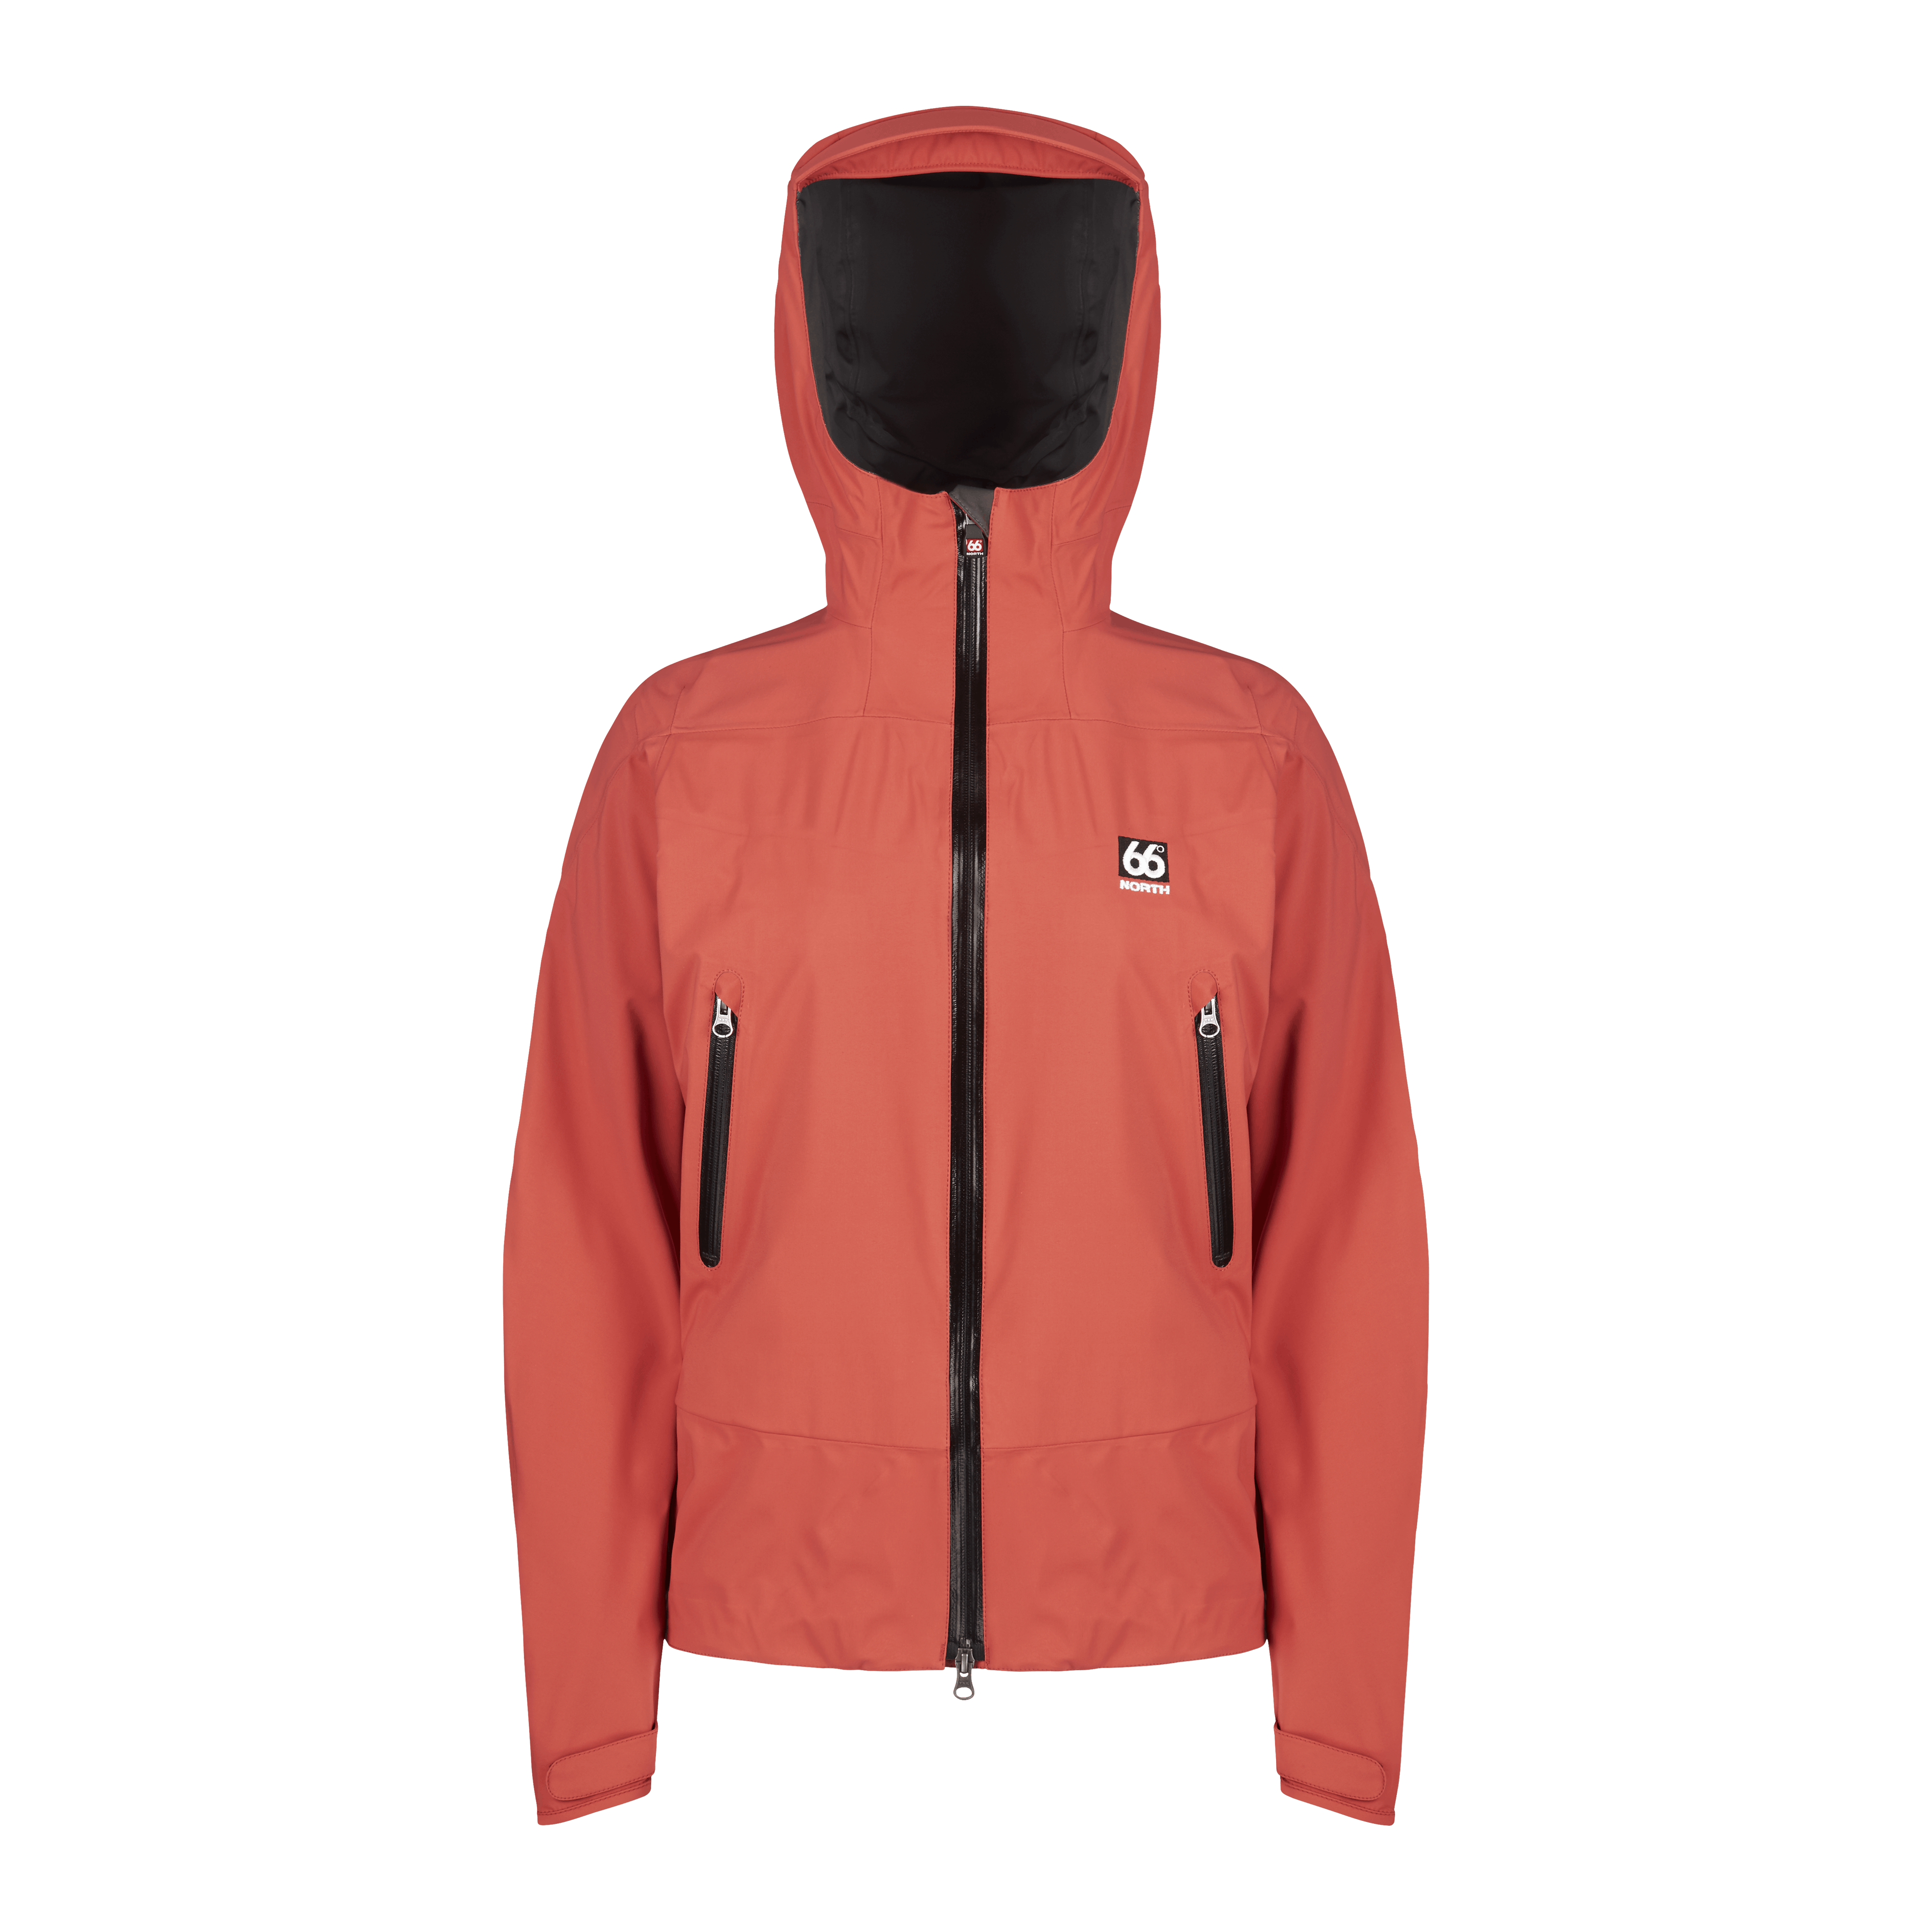 66 NORTH WOMEN'S SNÆFELL JACKETS & COATS - RED SAND - S,W11143